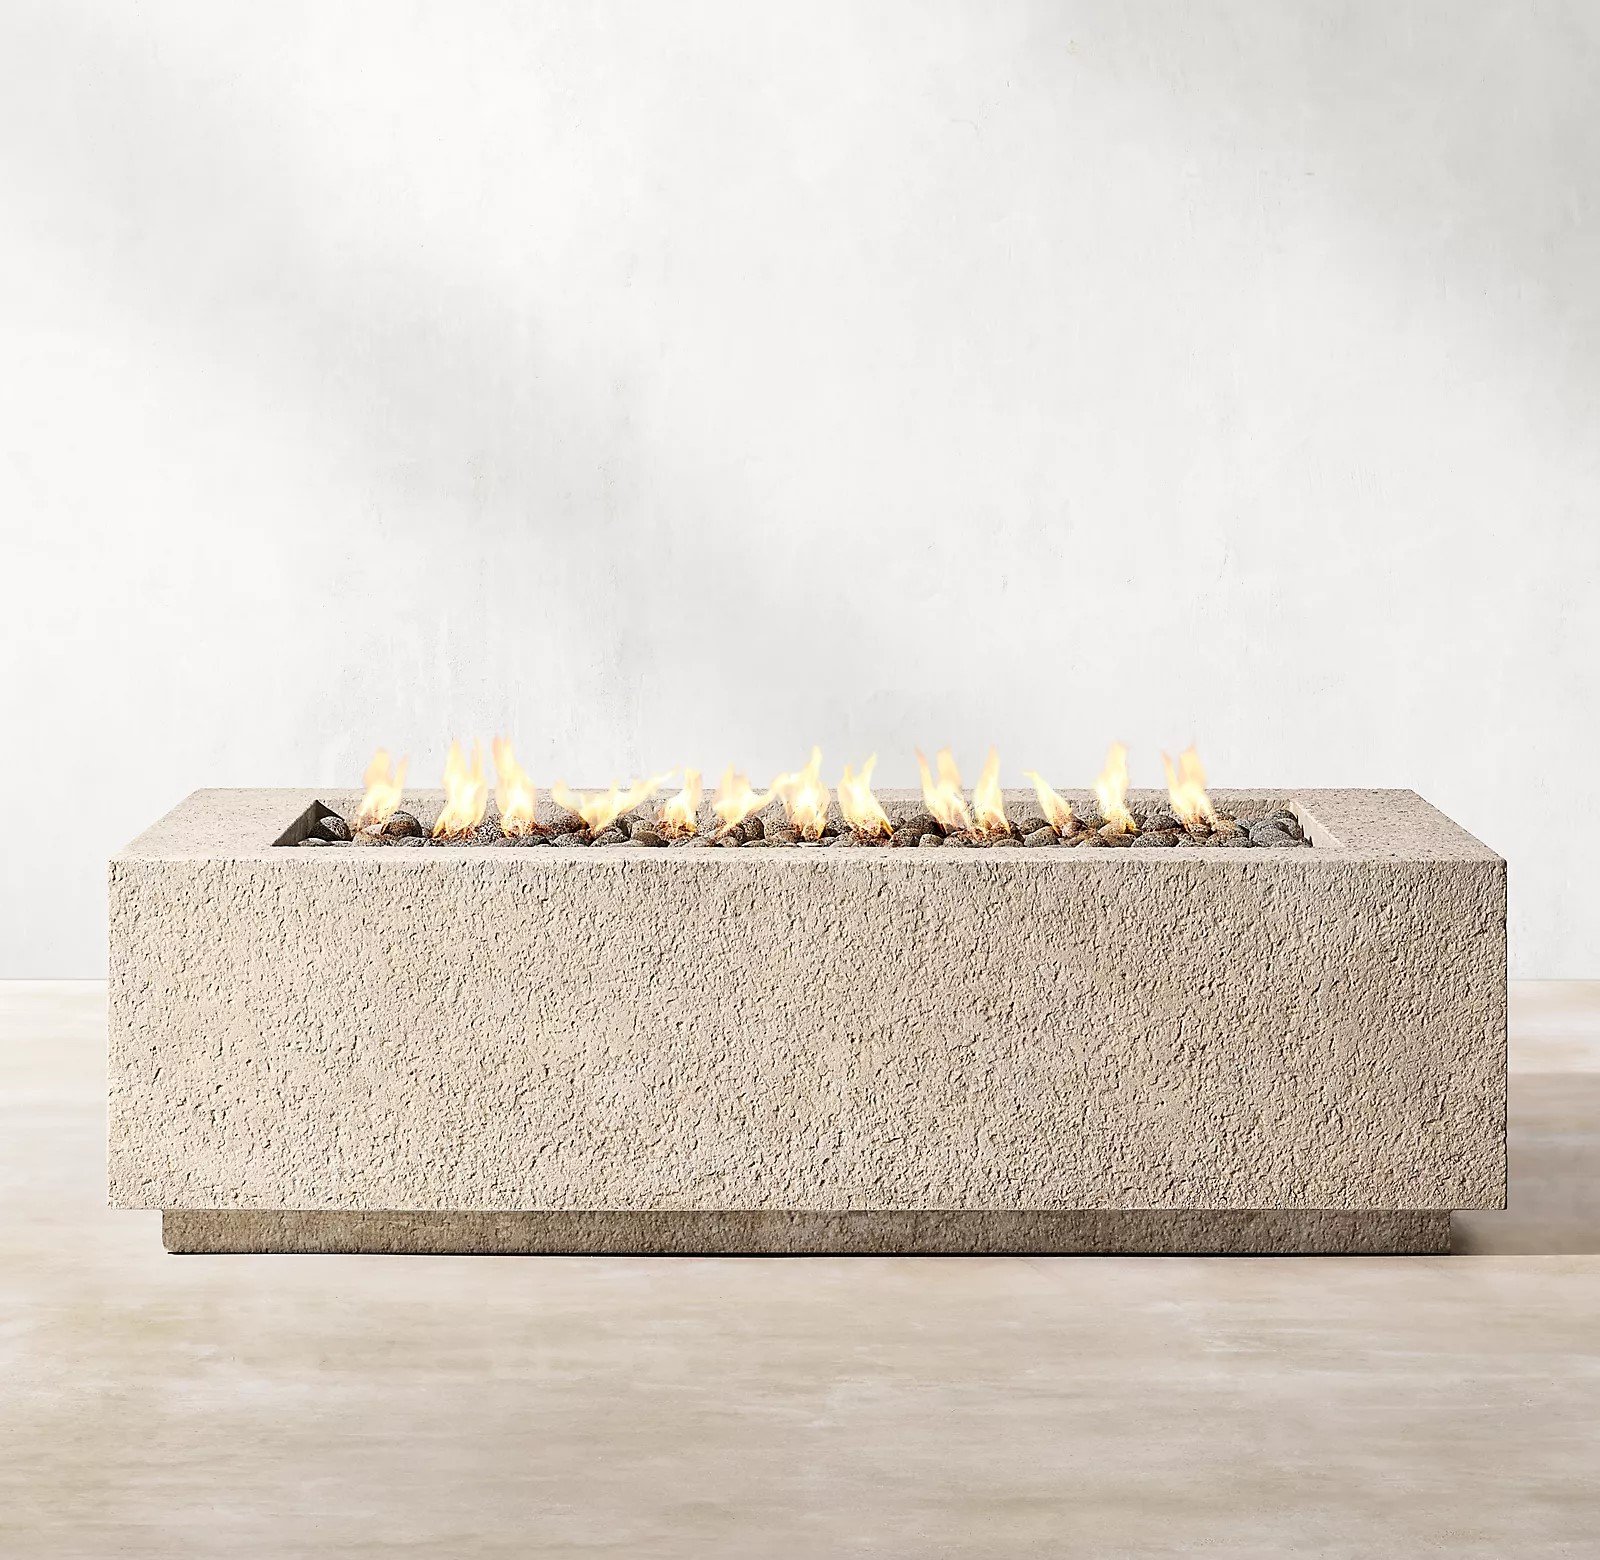 RH’s Yountville Rectangular Fire Table - Pairing minimalist geometry with rustic, hand-hewn texture, the Yountville gas fire pit table offers a bold, elemental presence outdoors. Masterfully crafted of concrete composite for the look of weathered stone with natural lava rock, it is a durable, lighter-weight alternative to pure concrete or stone, and is rated at 65,000 BTUs.SHOP NOW >” loading=”lazy”></noscript><br />
<img decoding=